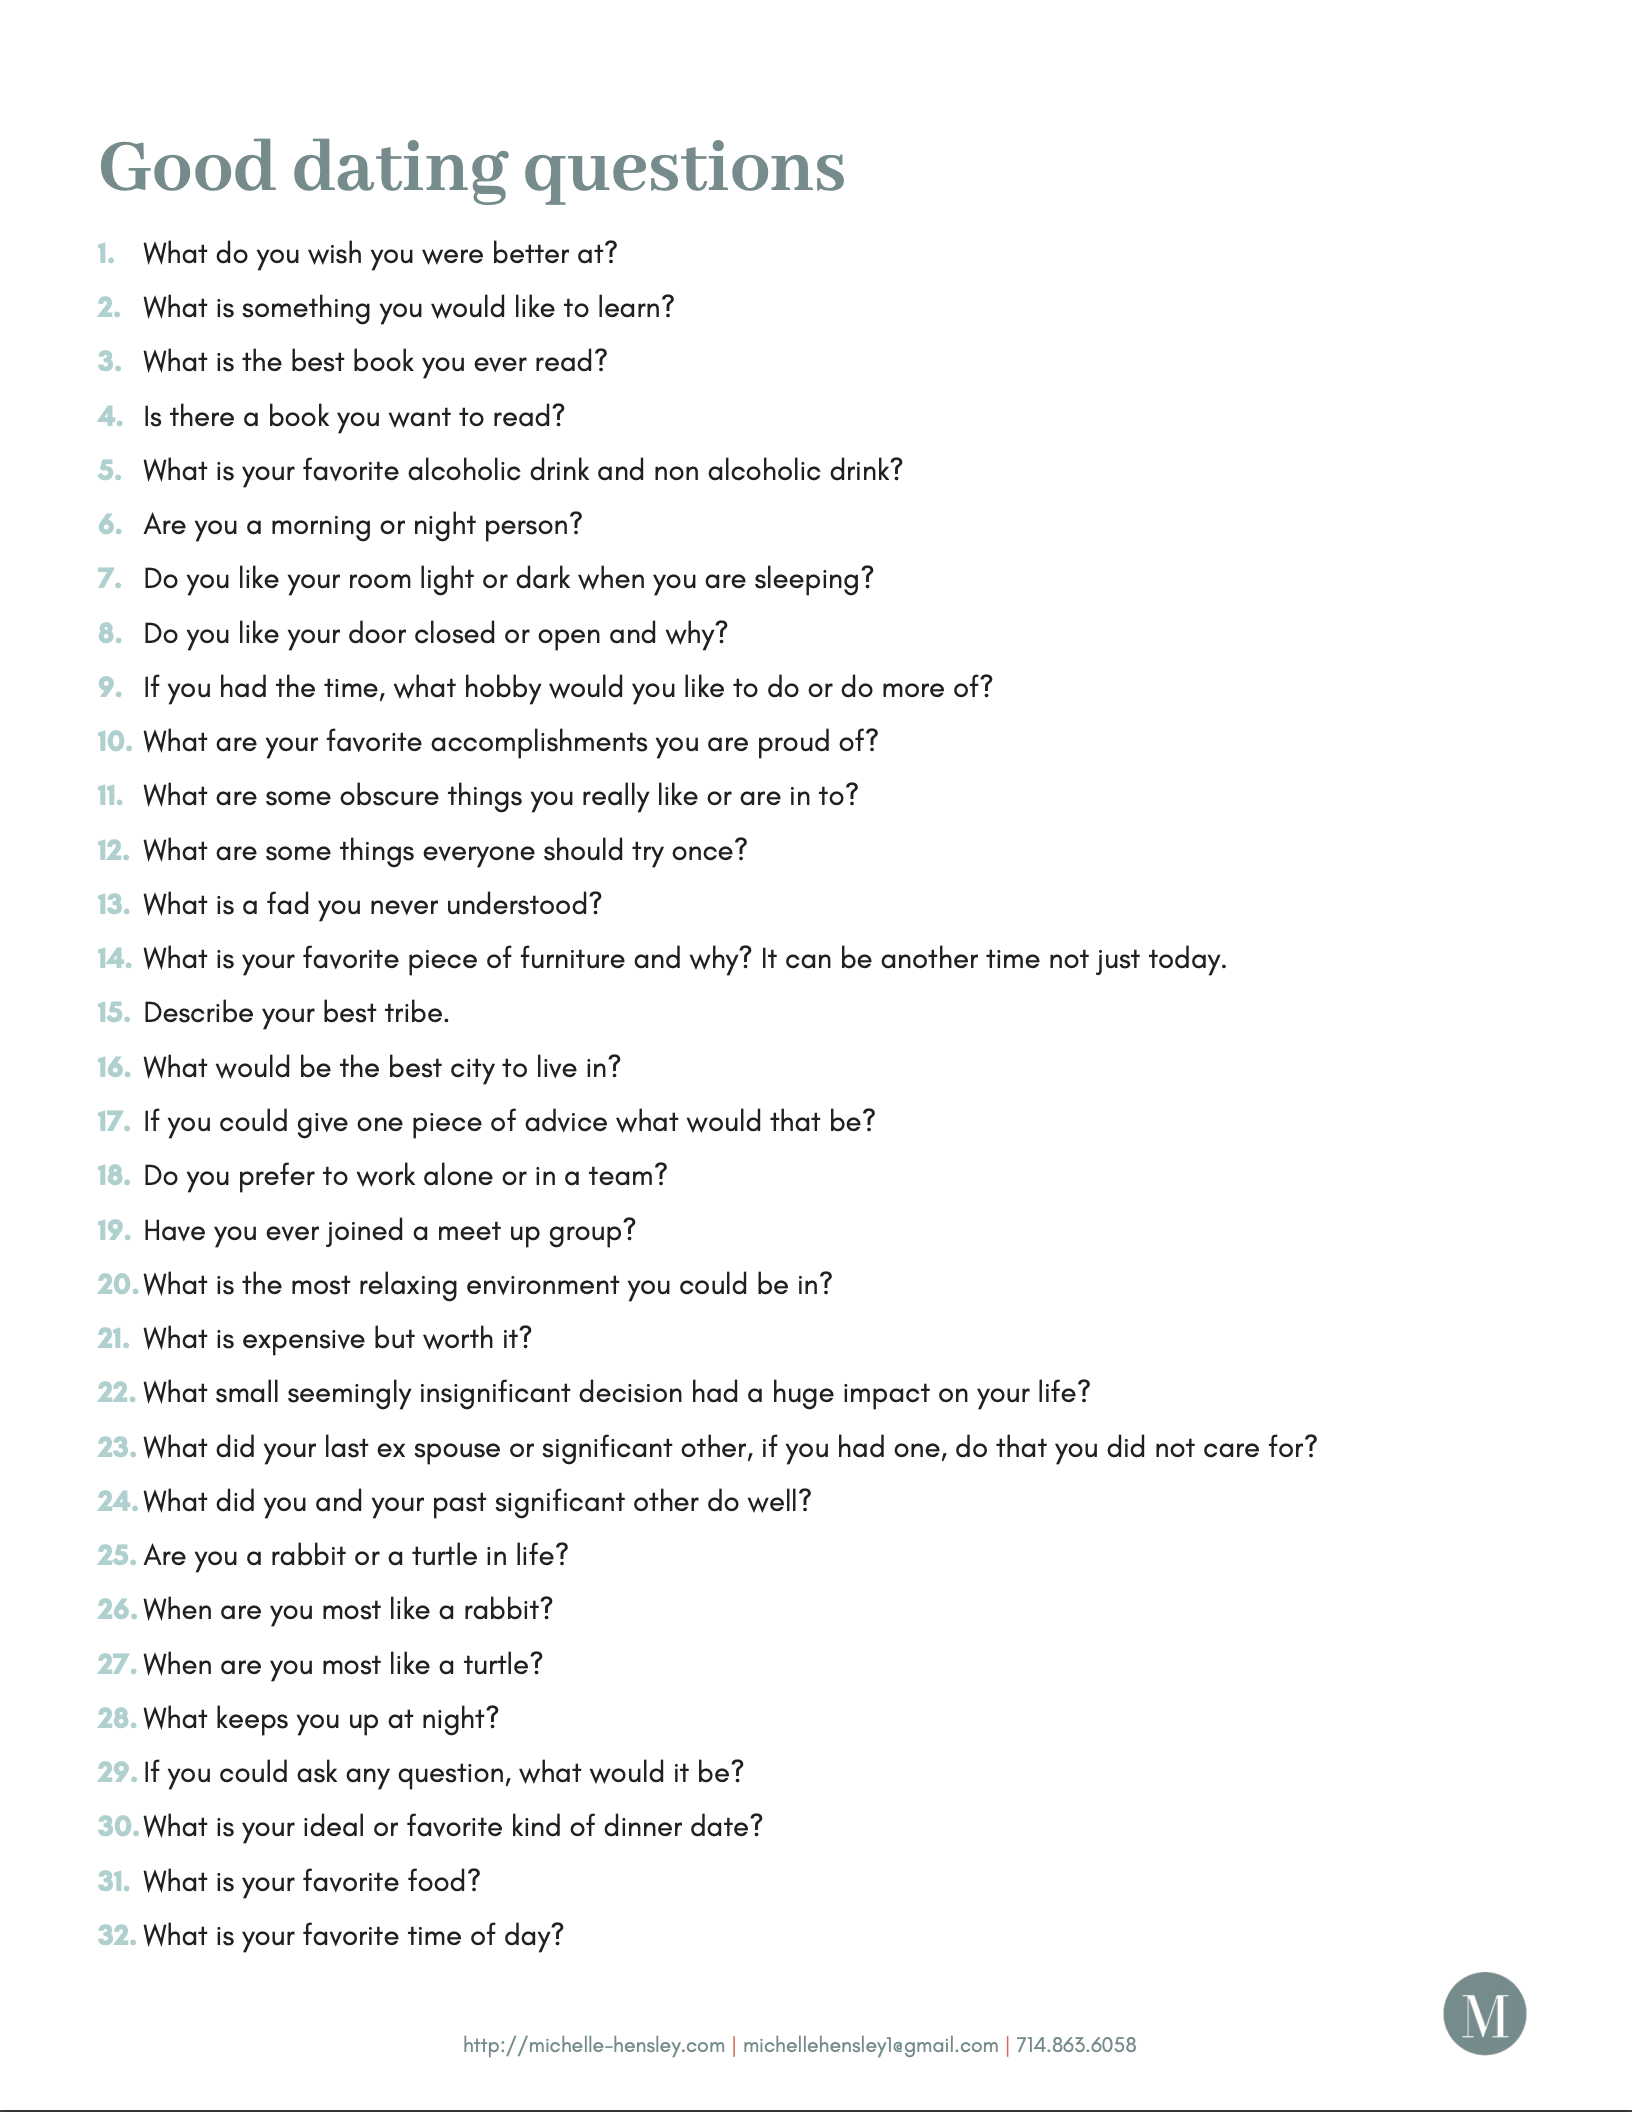 good questions to ask on a first date - Google Search (…